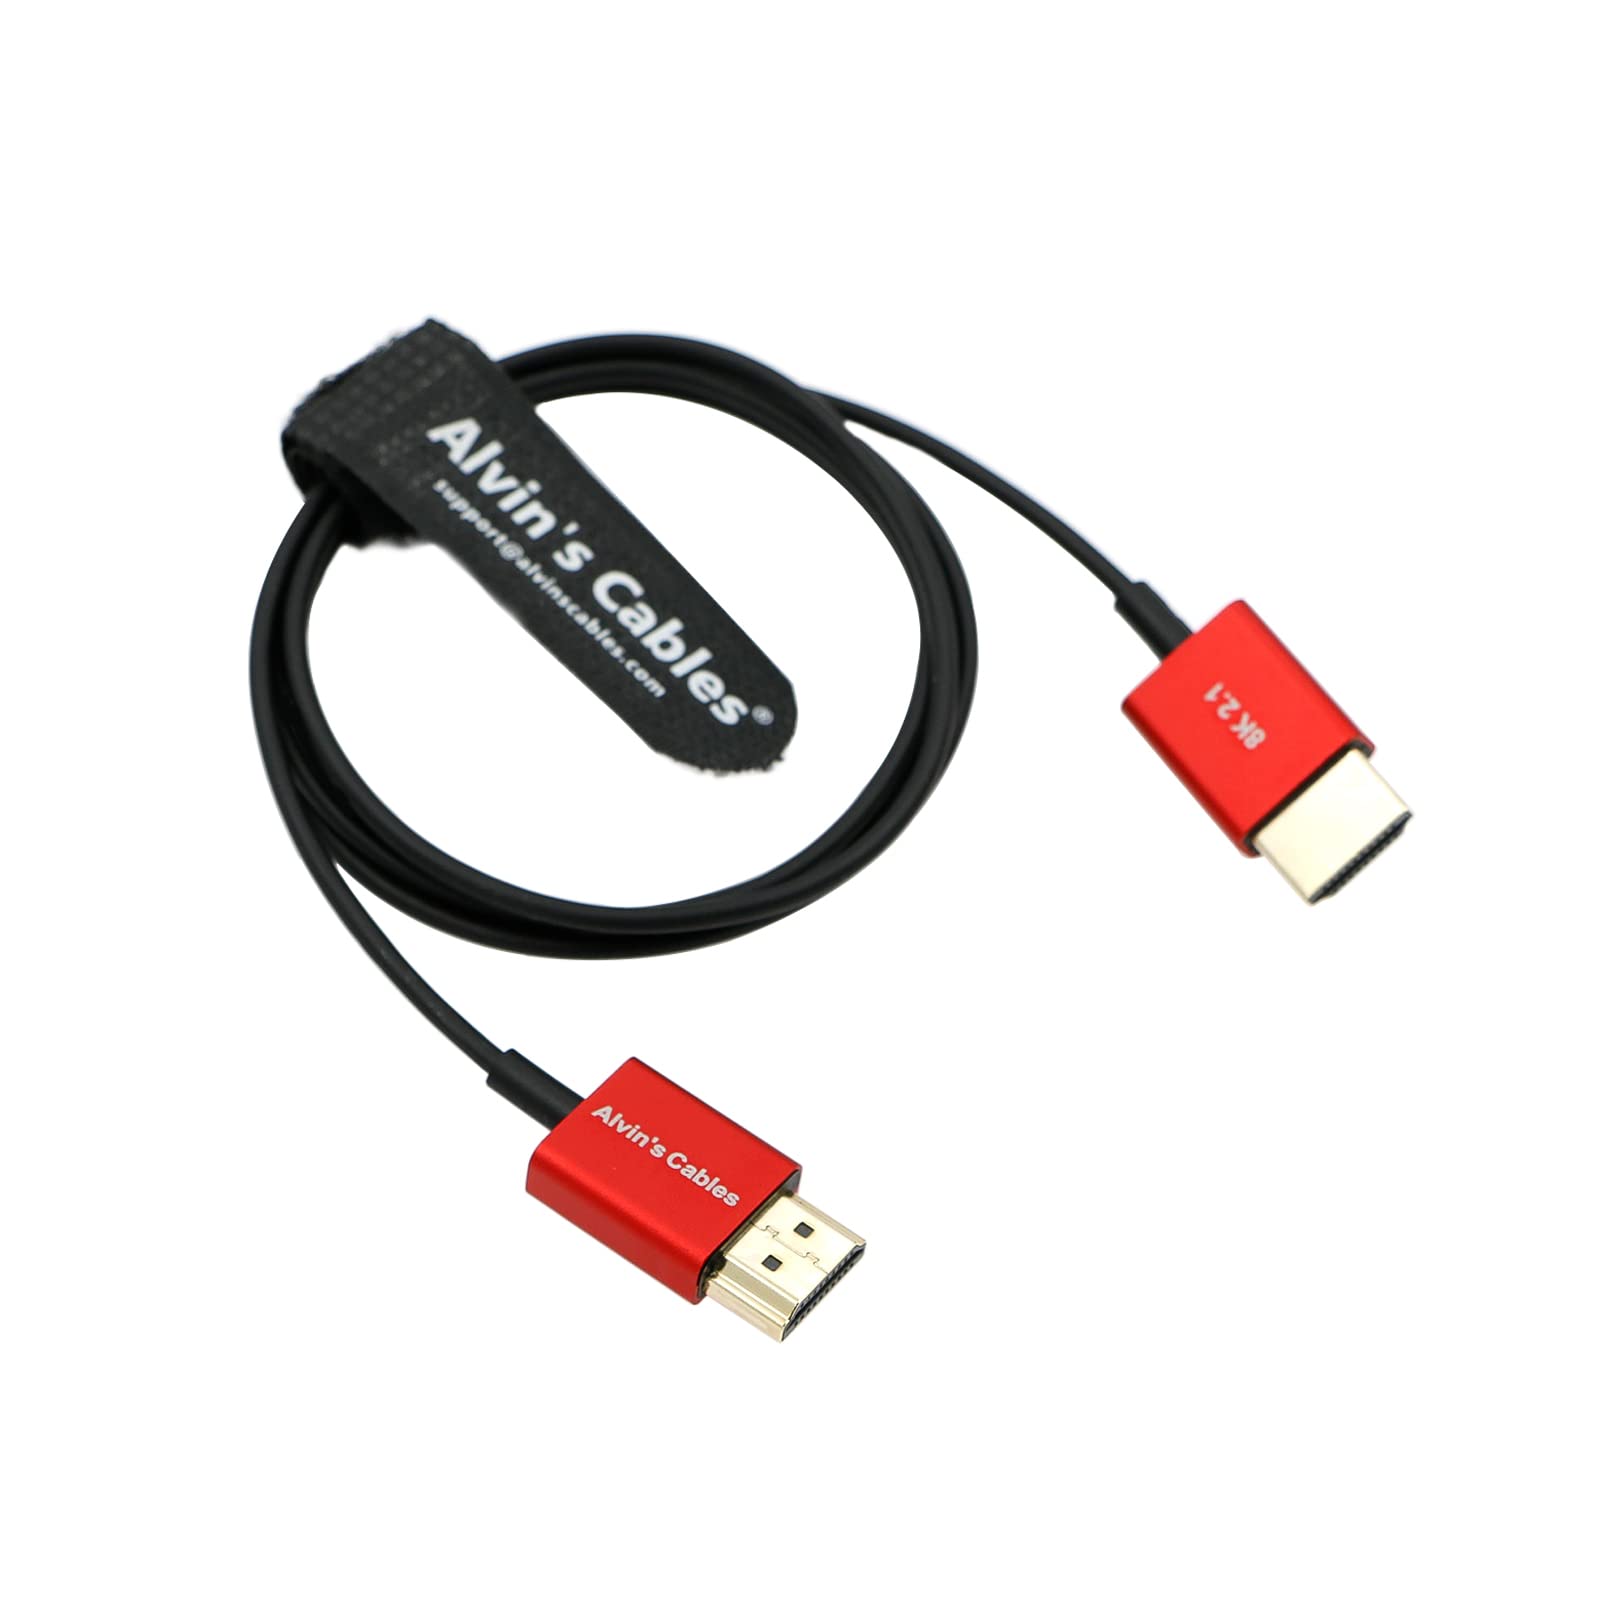 Alvin’s Cables 8K 2.1 Full HDMI Cable for Atomos Ninja-V 4K-60P Record from Z-CAM for Canon-C70, for Sony A7S3,A9,A74